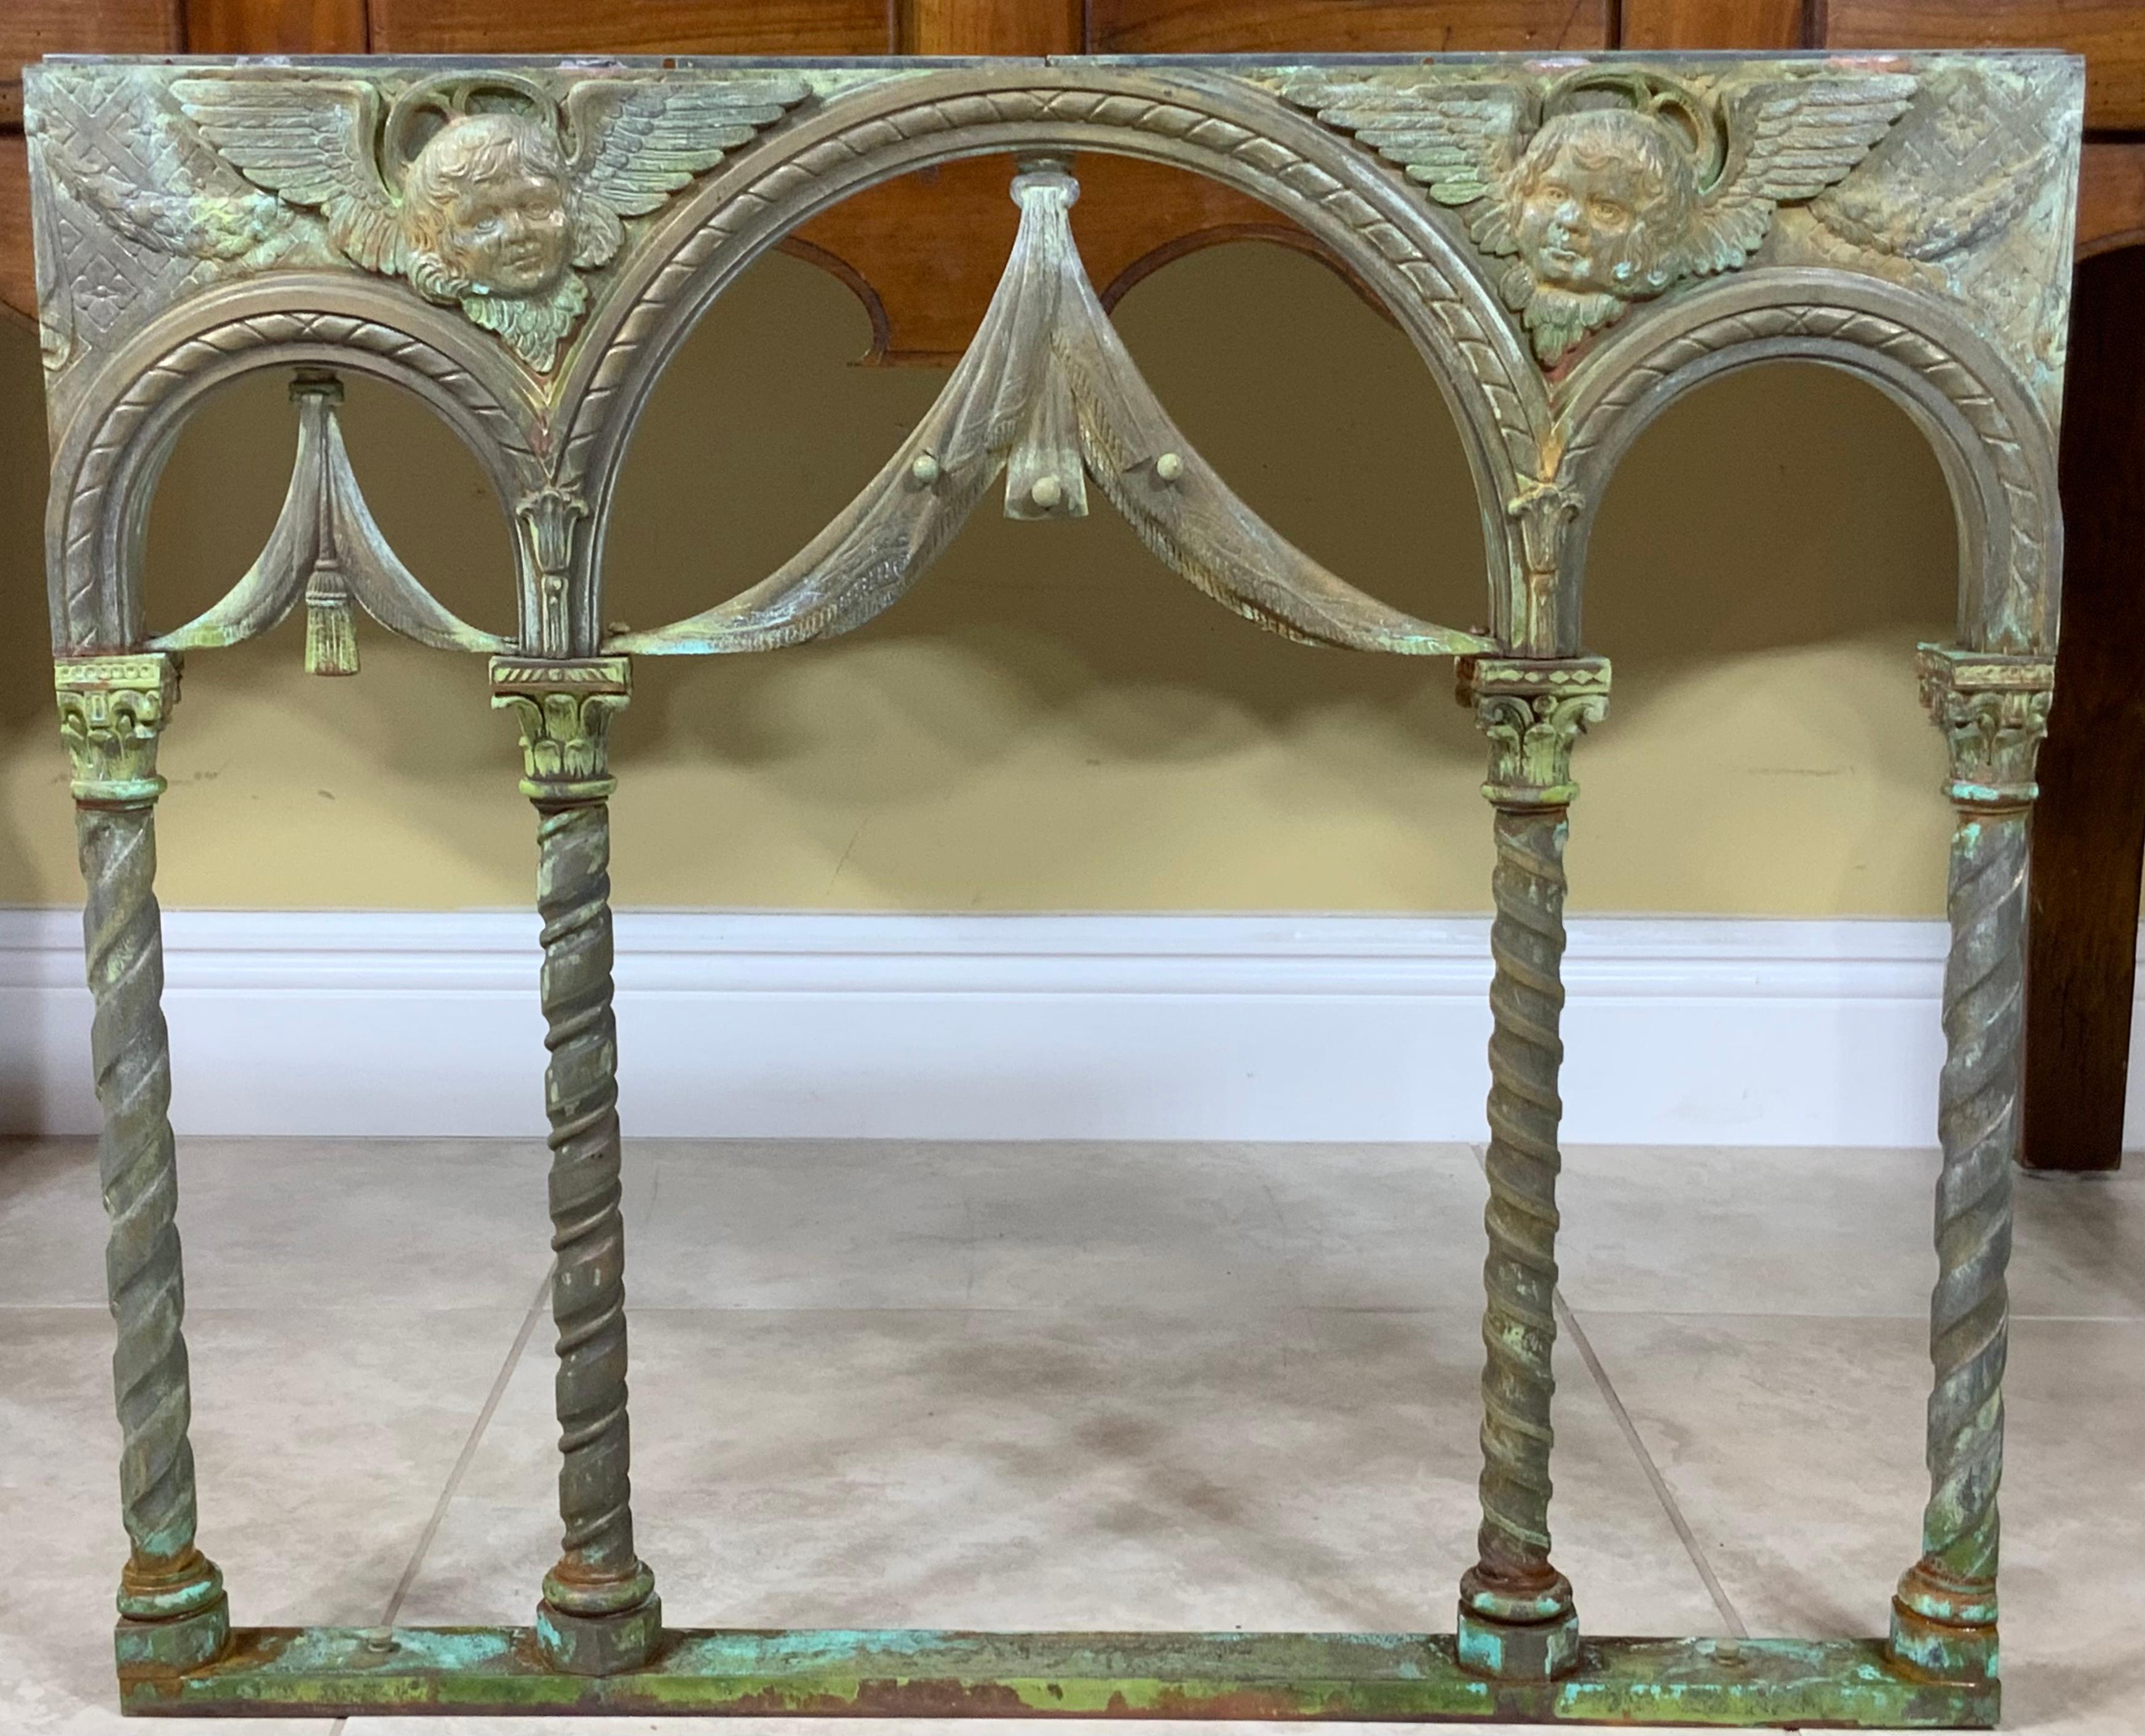 One of a kind architectural element made of brass and bronze exceptional three arches, ornate columns , with two beautiful winged Cherubs overlooking on each side. 
One side missing veil.